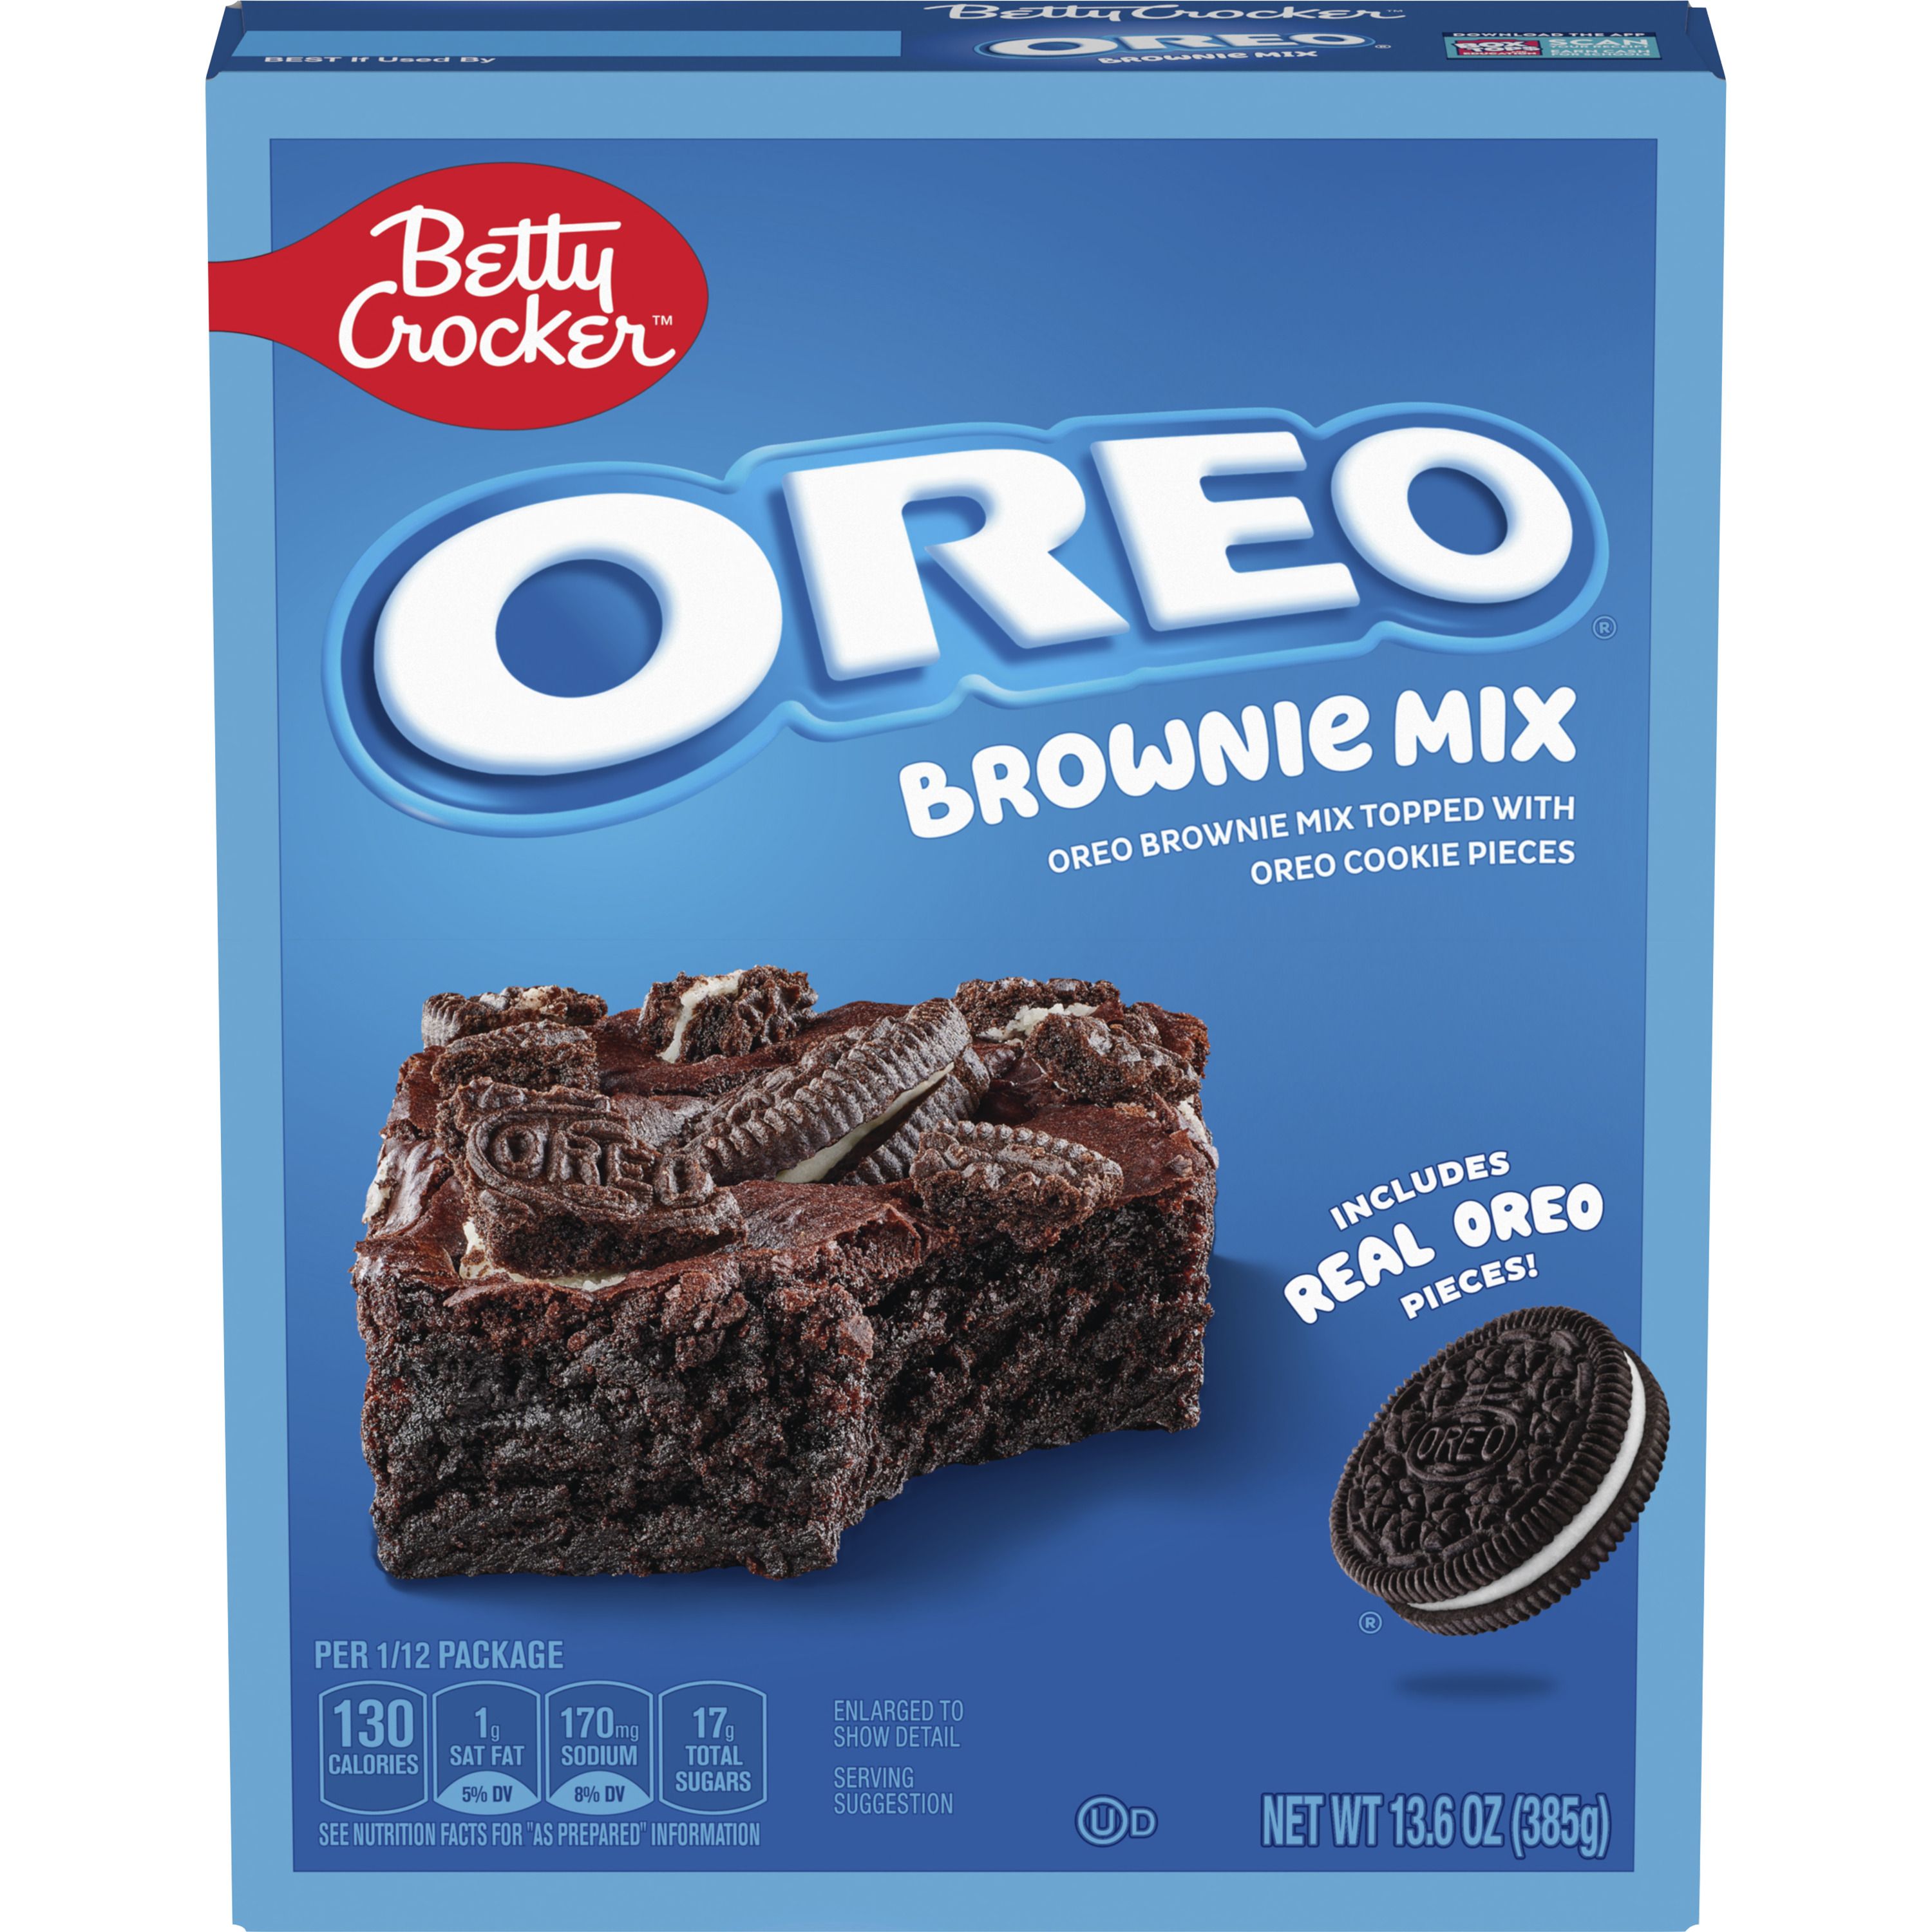 Betty Crocker OREO Brownie Mix, OREO Brownie Mix Topped With OREO Cookie Pieces, 13.6 oz - Front